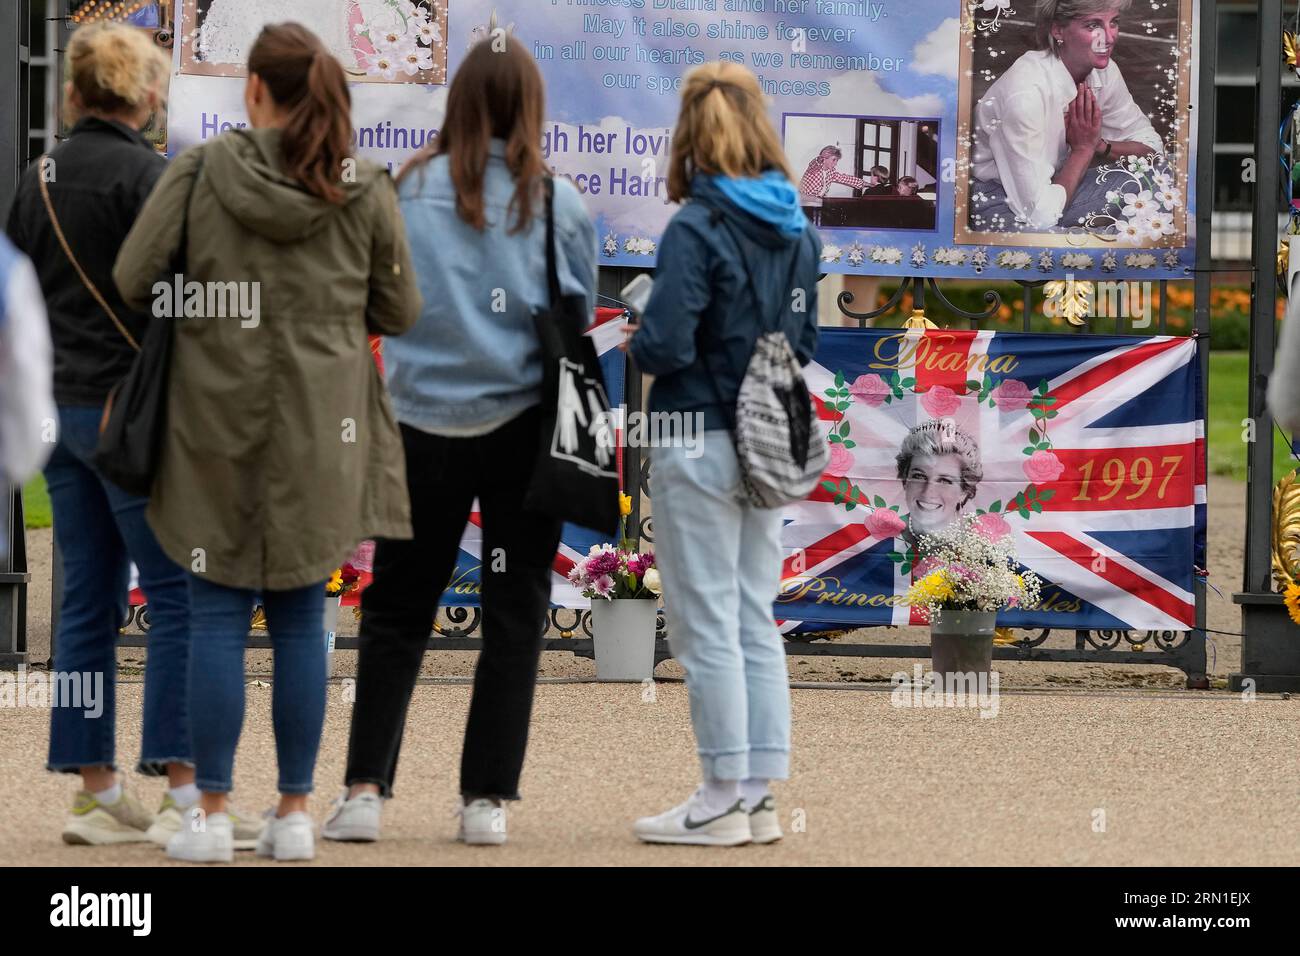 https://c8.alamy.com/comp/2RN1EJX/people-stand-in-front-of-pictures-of-princess-diana-at-the-gates-of-kensington-palace-in-london-thursday-aug-31-2023-in-the-early-hours-of-august-31-1997-diana-princess-of-wales-died-in-hospital-after-being-injured-in-a-motor-vehicle-accident-in-a-road-tunnel-in-paris-her-partner-dodi-fayed-and-the-driver-of-the-mercedes-benz-w140-henri-paul-were-pronounced-dead-at-the-scene-their-bodyguard-trevor-rees-jones-survived-with-serious-injuriesap-photofrank-augstein-2RN1EJX.jpg